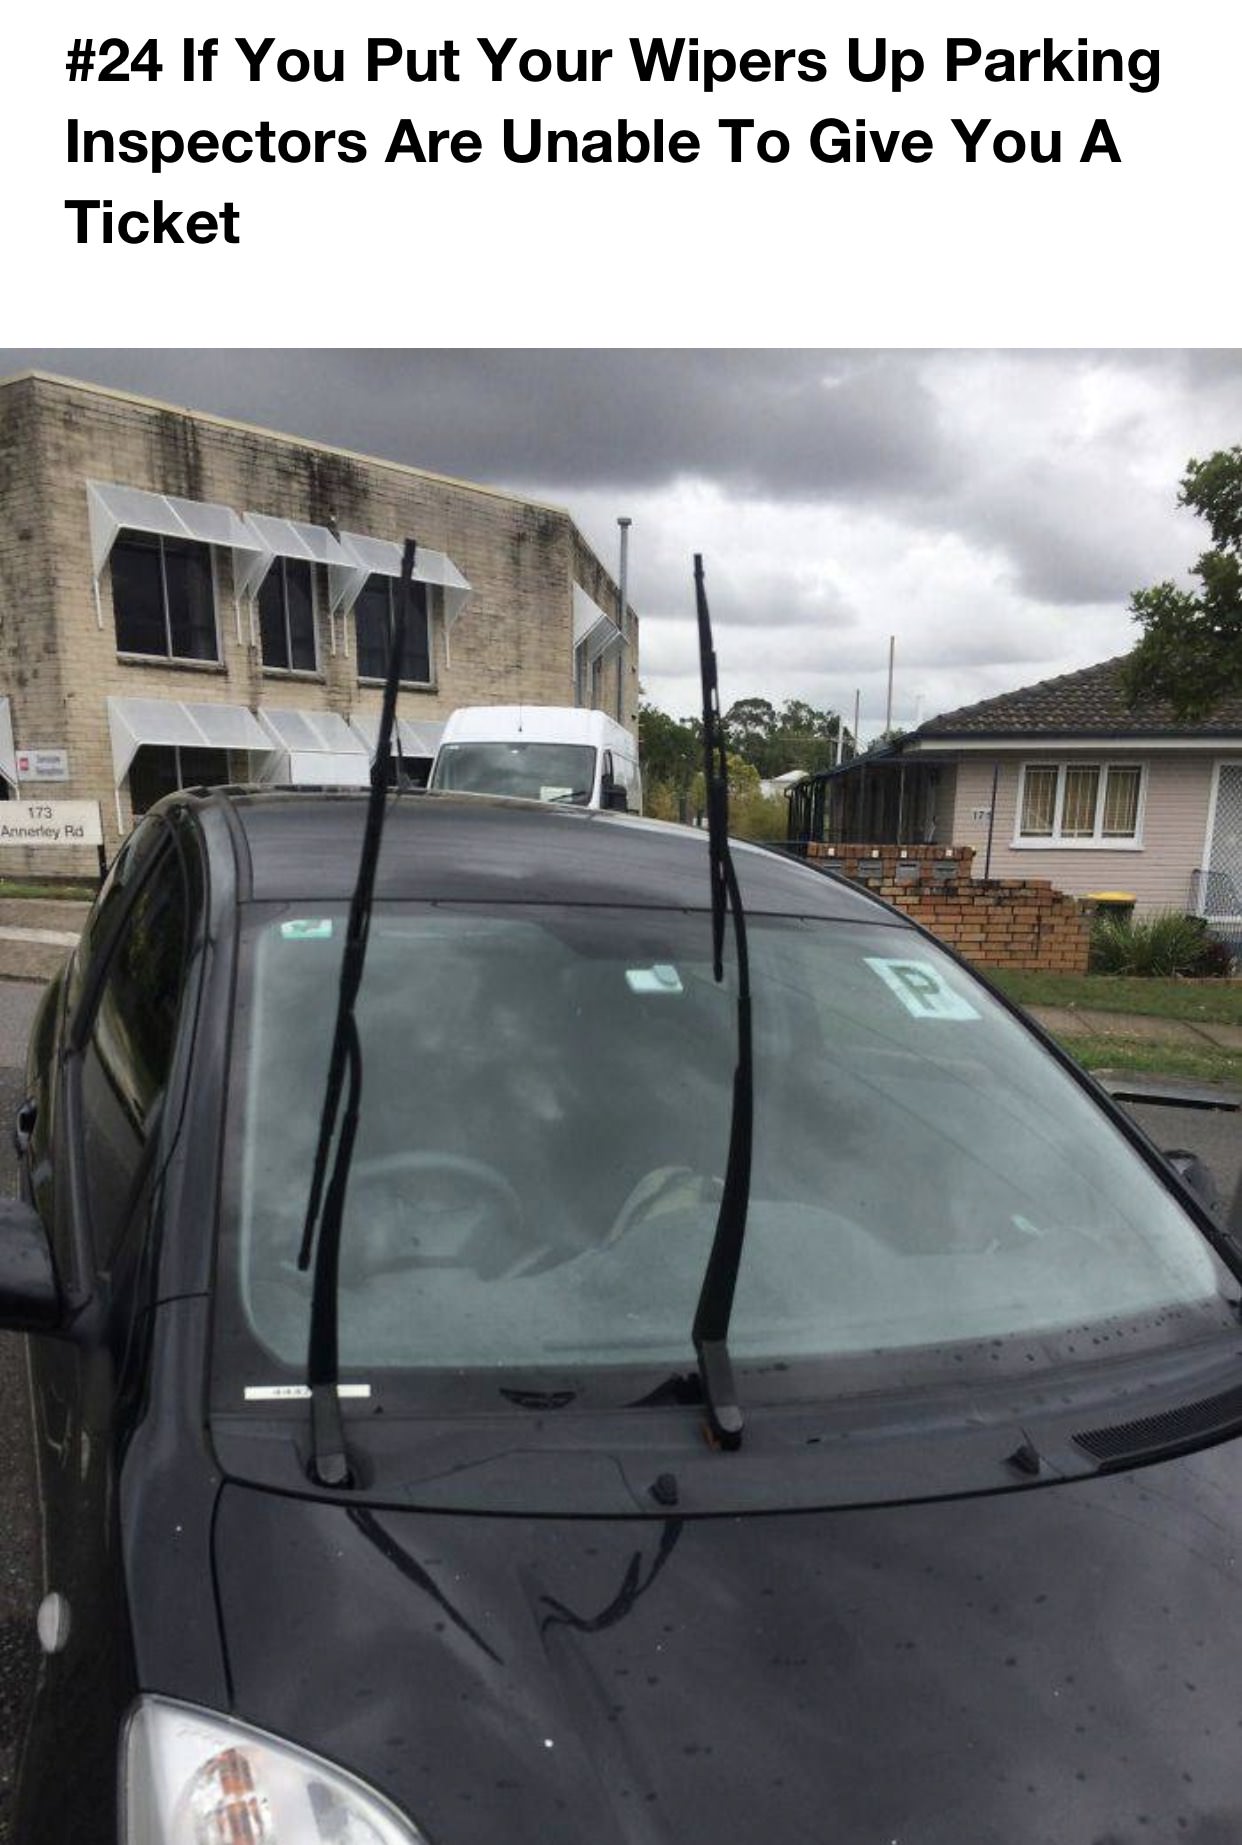 car with windscreen wipers up - If You Put Your Wipers Up Parking Inspectors Are Unable To Give You A Ticket 173 Annerley Rd